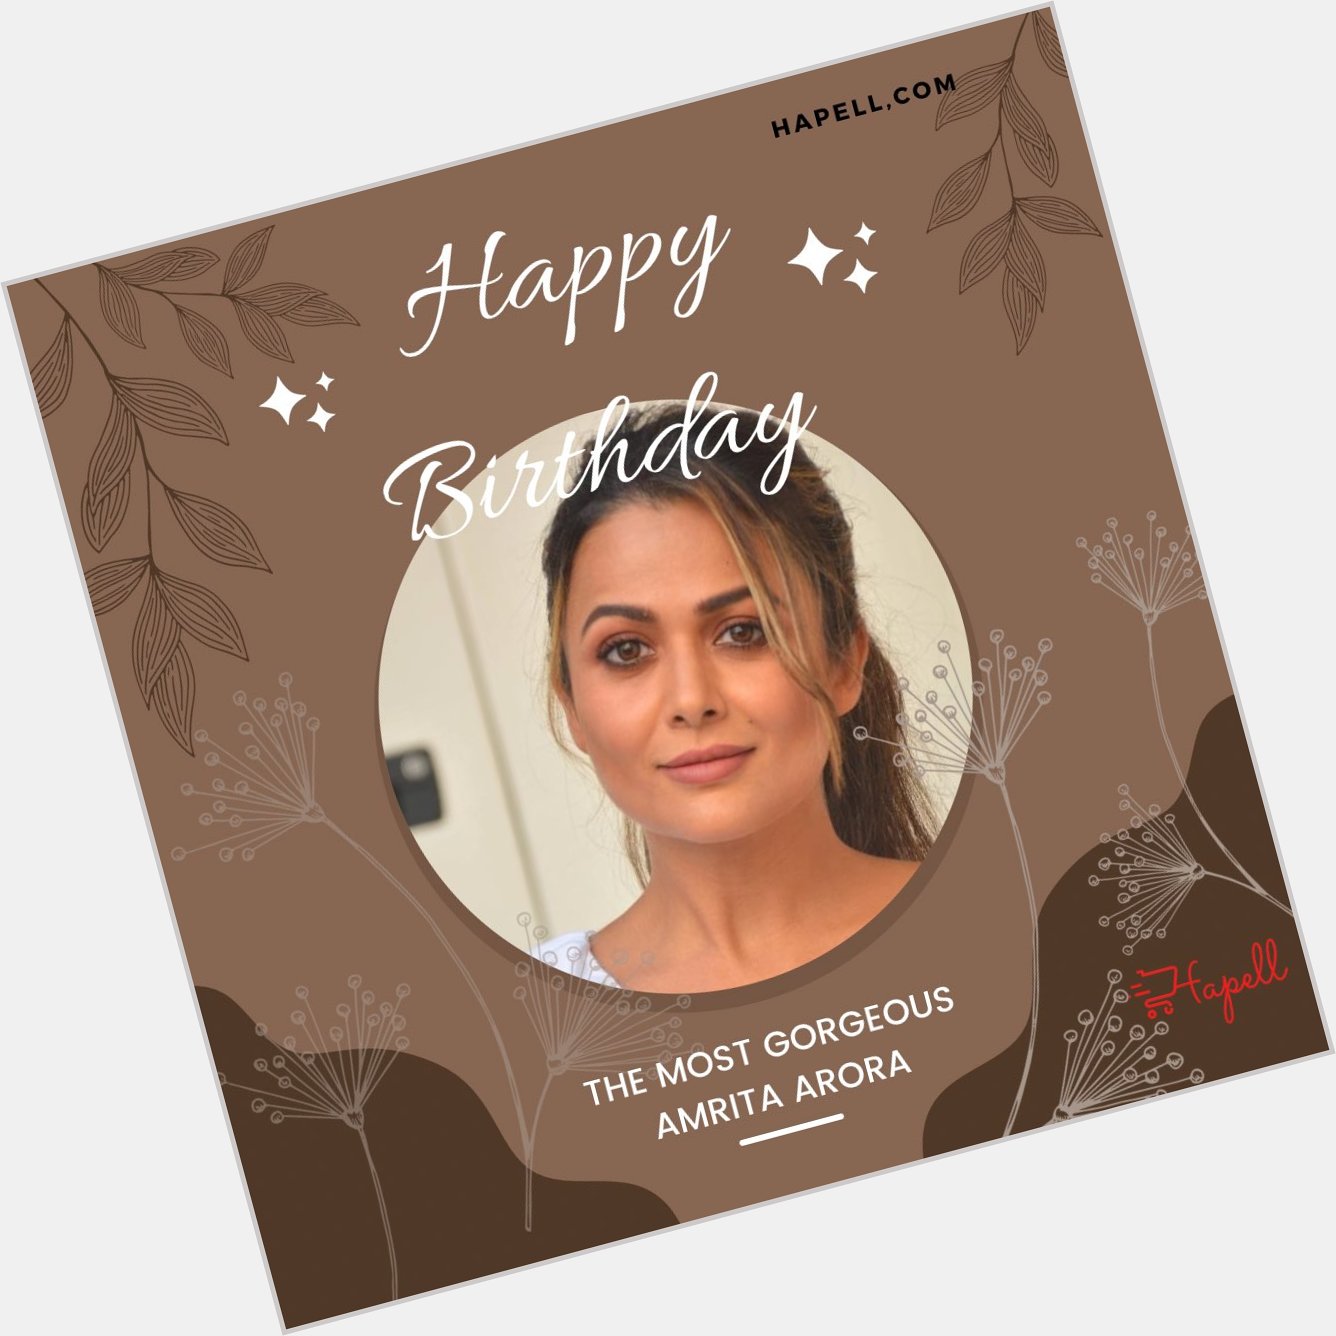 Wishing the Gorgeous Amrita Arora a very blessed happy birthday 
May God bless , 